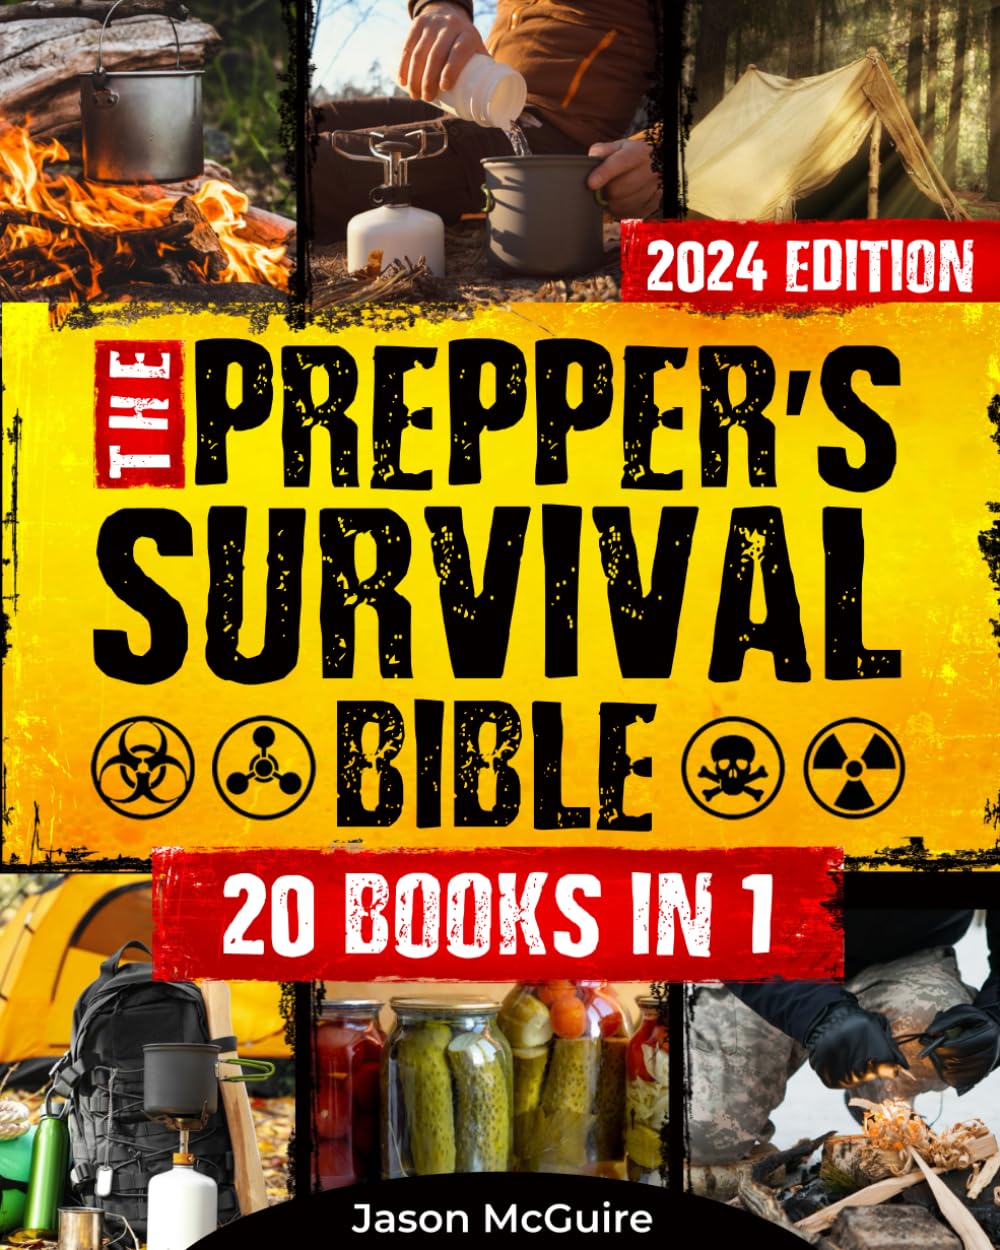 The Prepper’s Survival Bible: 20 in 1: The Long-Term Survival Guide to Face Any Scenario with Life-Saving Strategies, Stockpiling, Water Filtration, Off-Grid Living, and Self-Defense